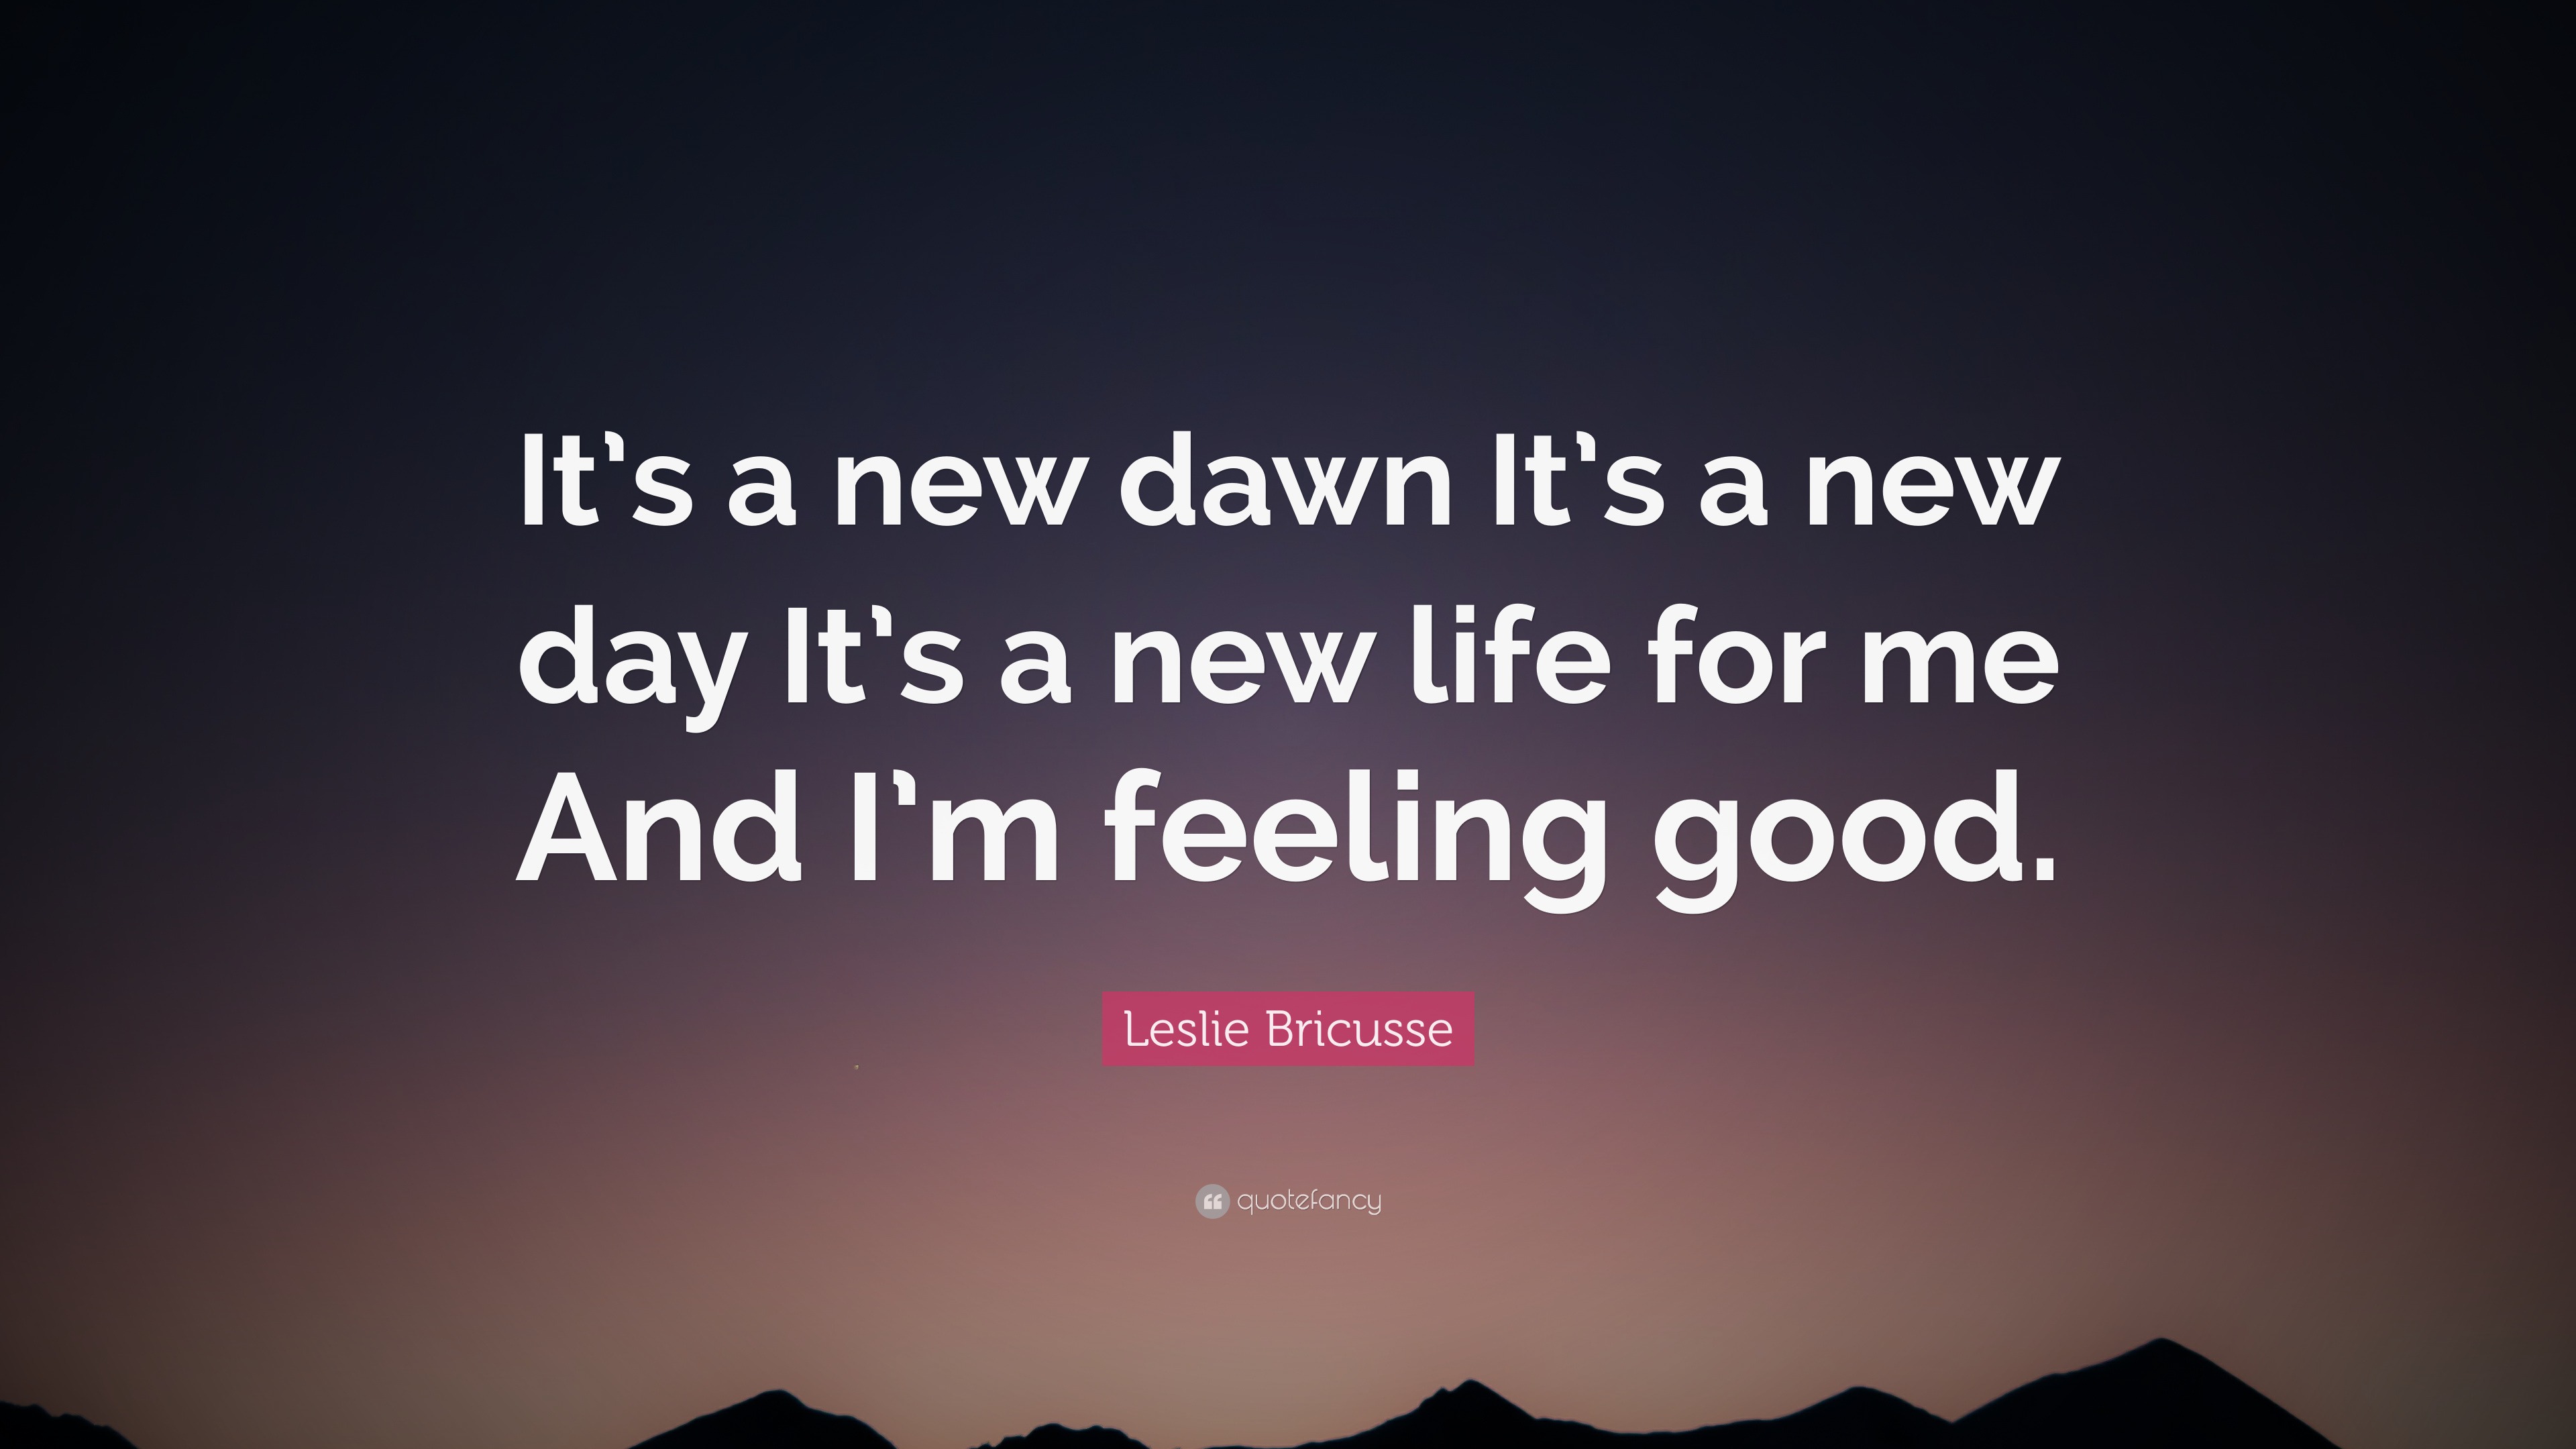 Leslie Bricusse Quote It S A New Dawn It S A New Day It S A New Life For